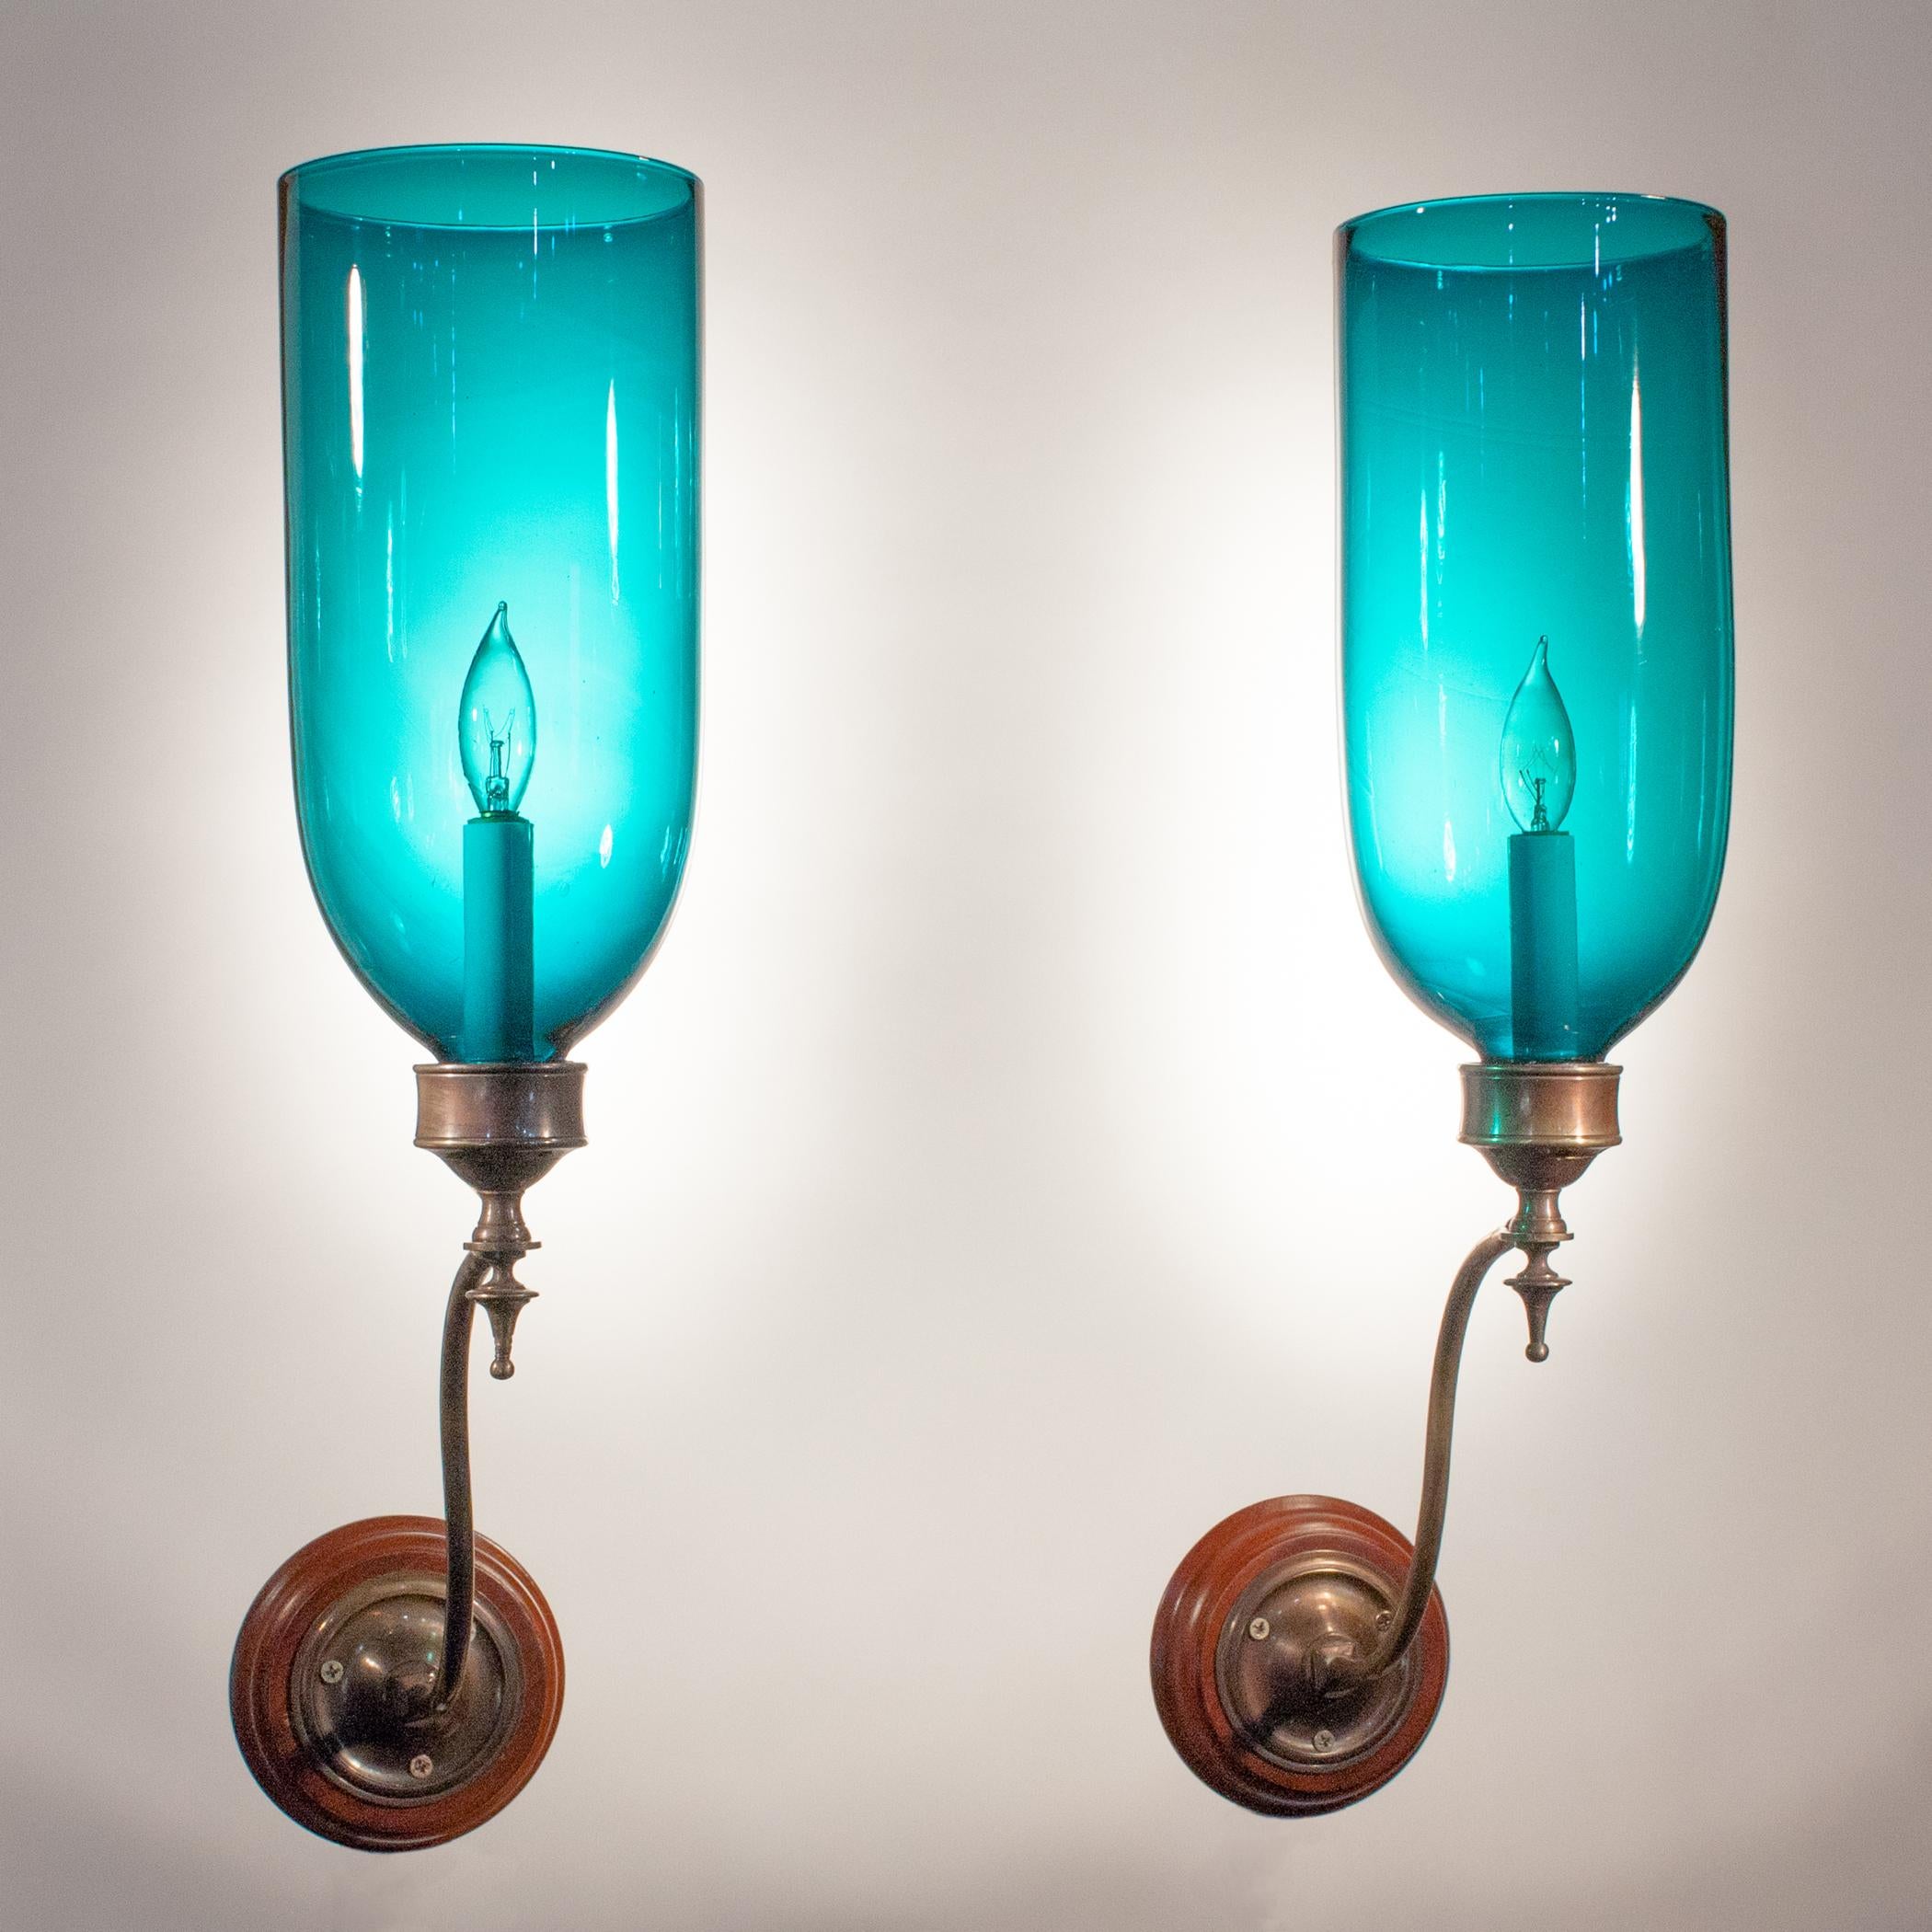 An exceptional set of four English hurricane shade sconces, circa 1860, with a teal blue-green hue. These authentic shades have desirable air bubbles and swirls that speak to the quality and age of the hand blown glass. The wall sconces are newly